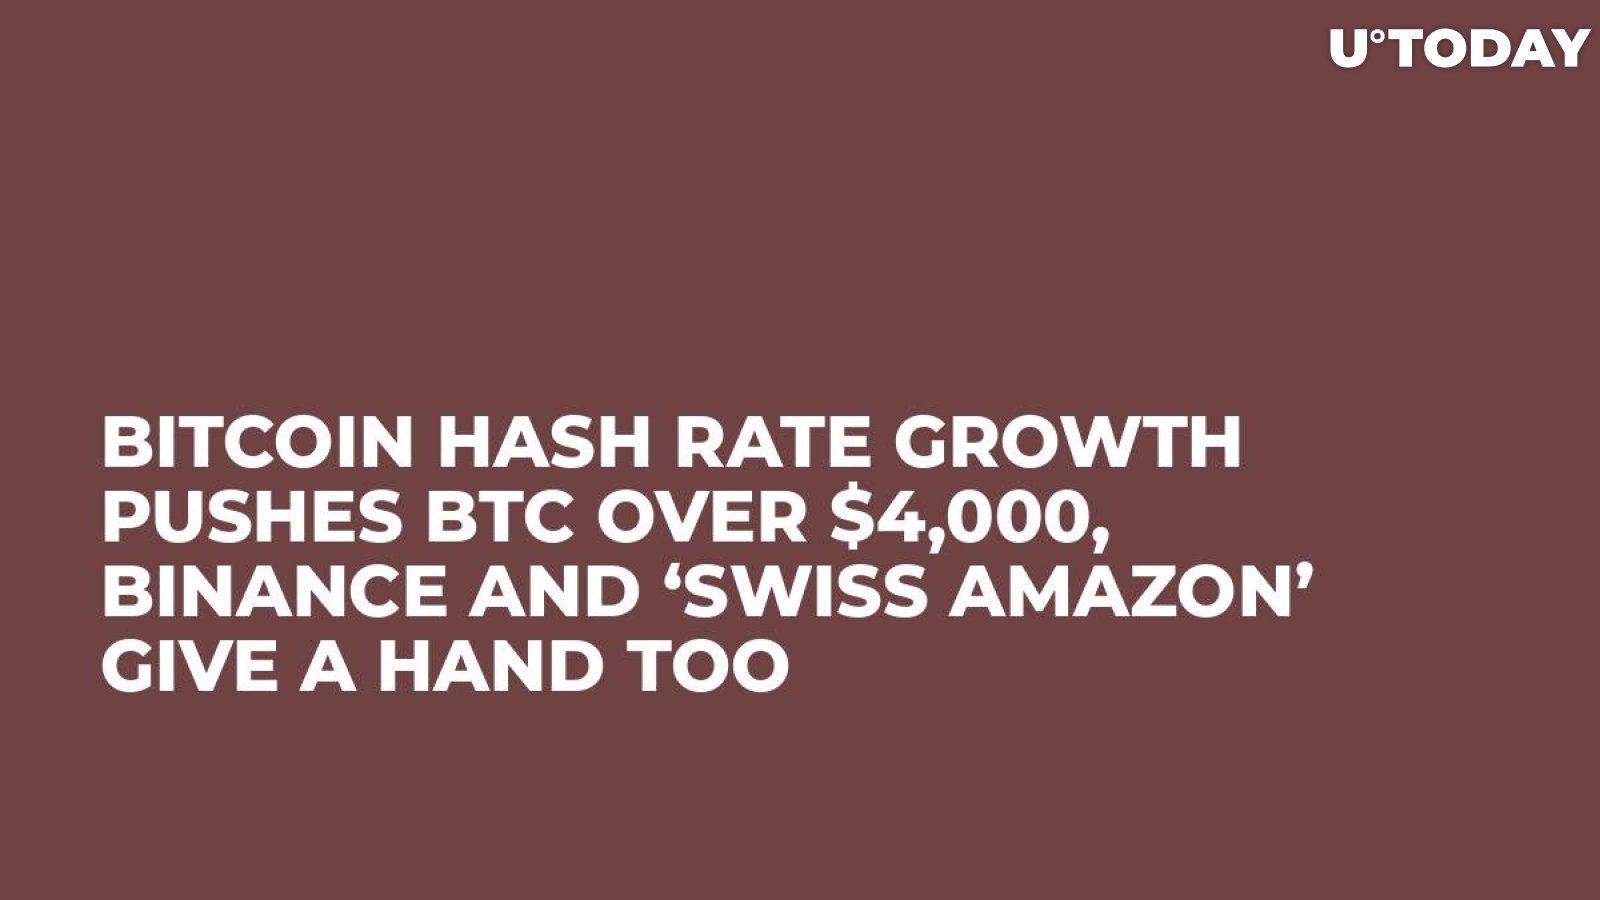 Bitcoin Hash Rate Growth Pushes BTC over $4,000, Binance and ‘Swiss Amazon’ Give a Hand Too